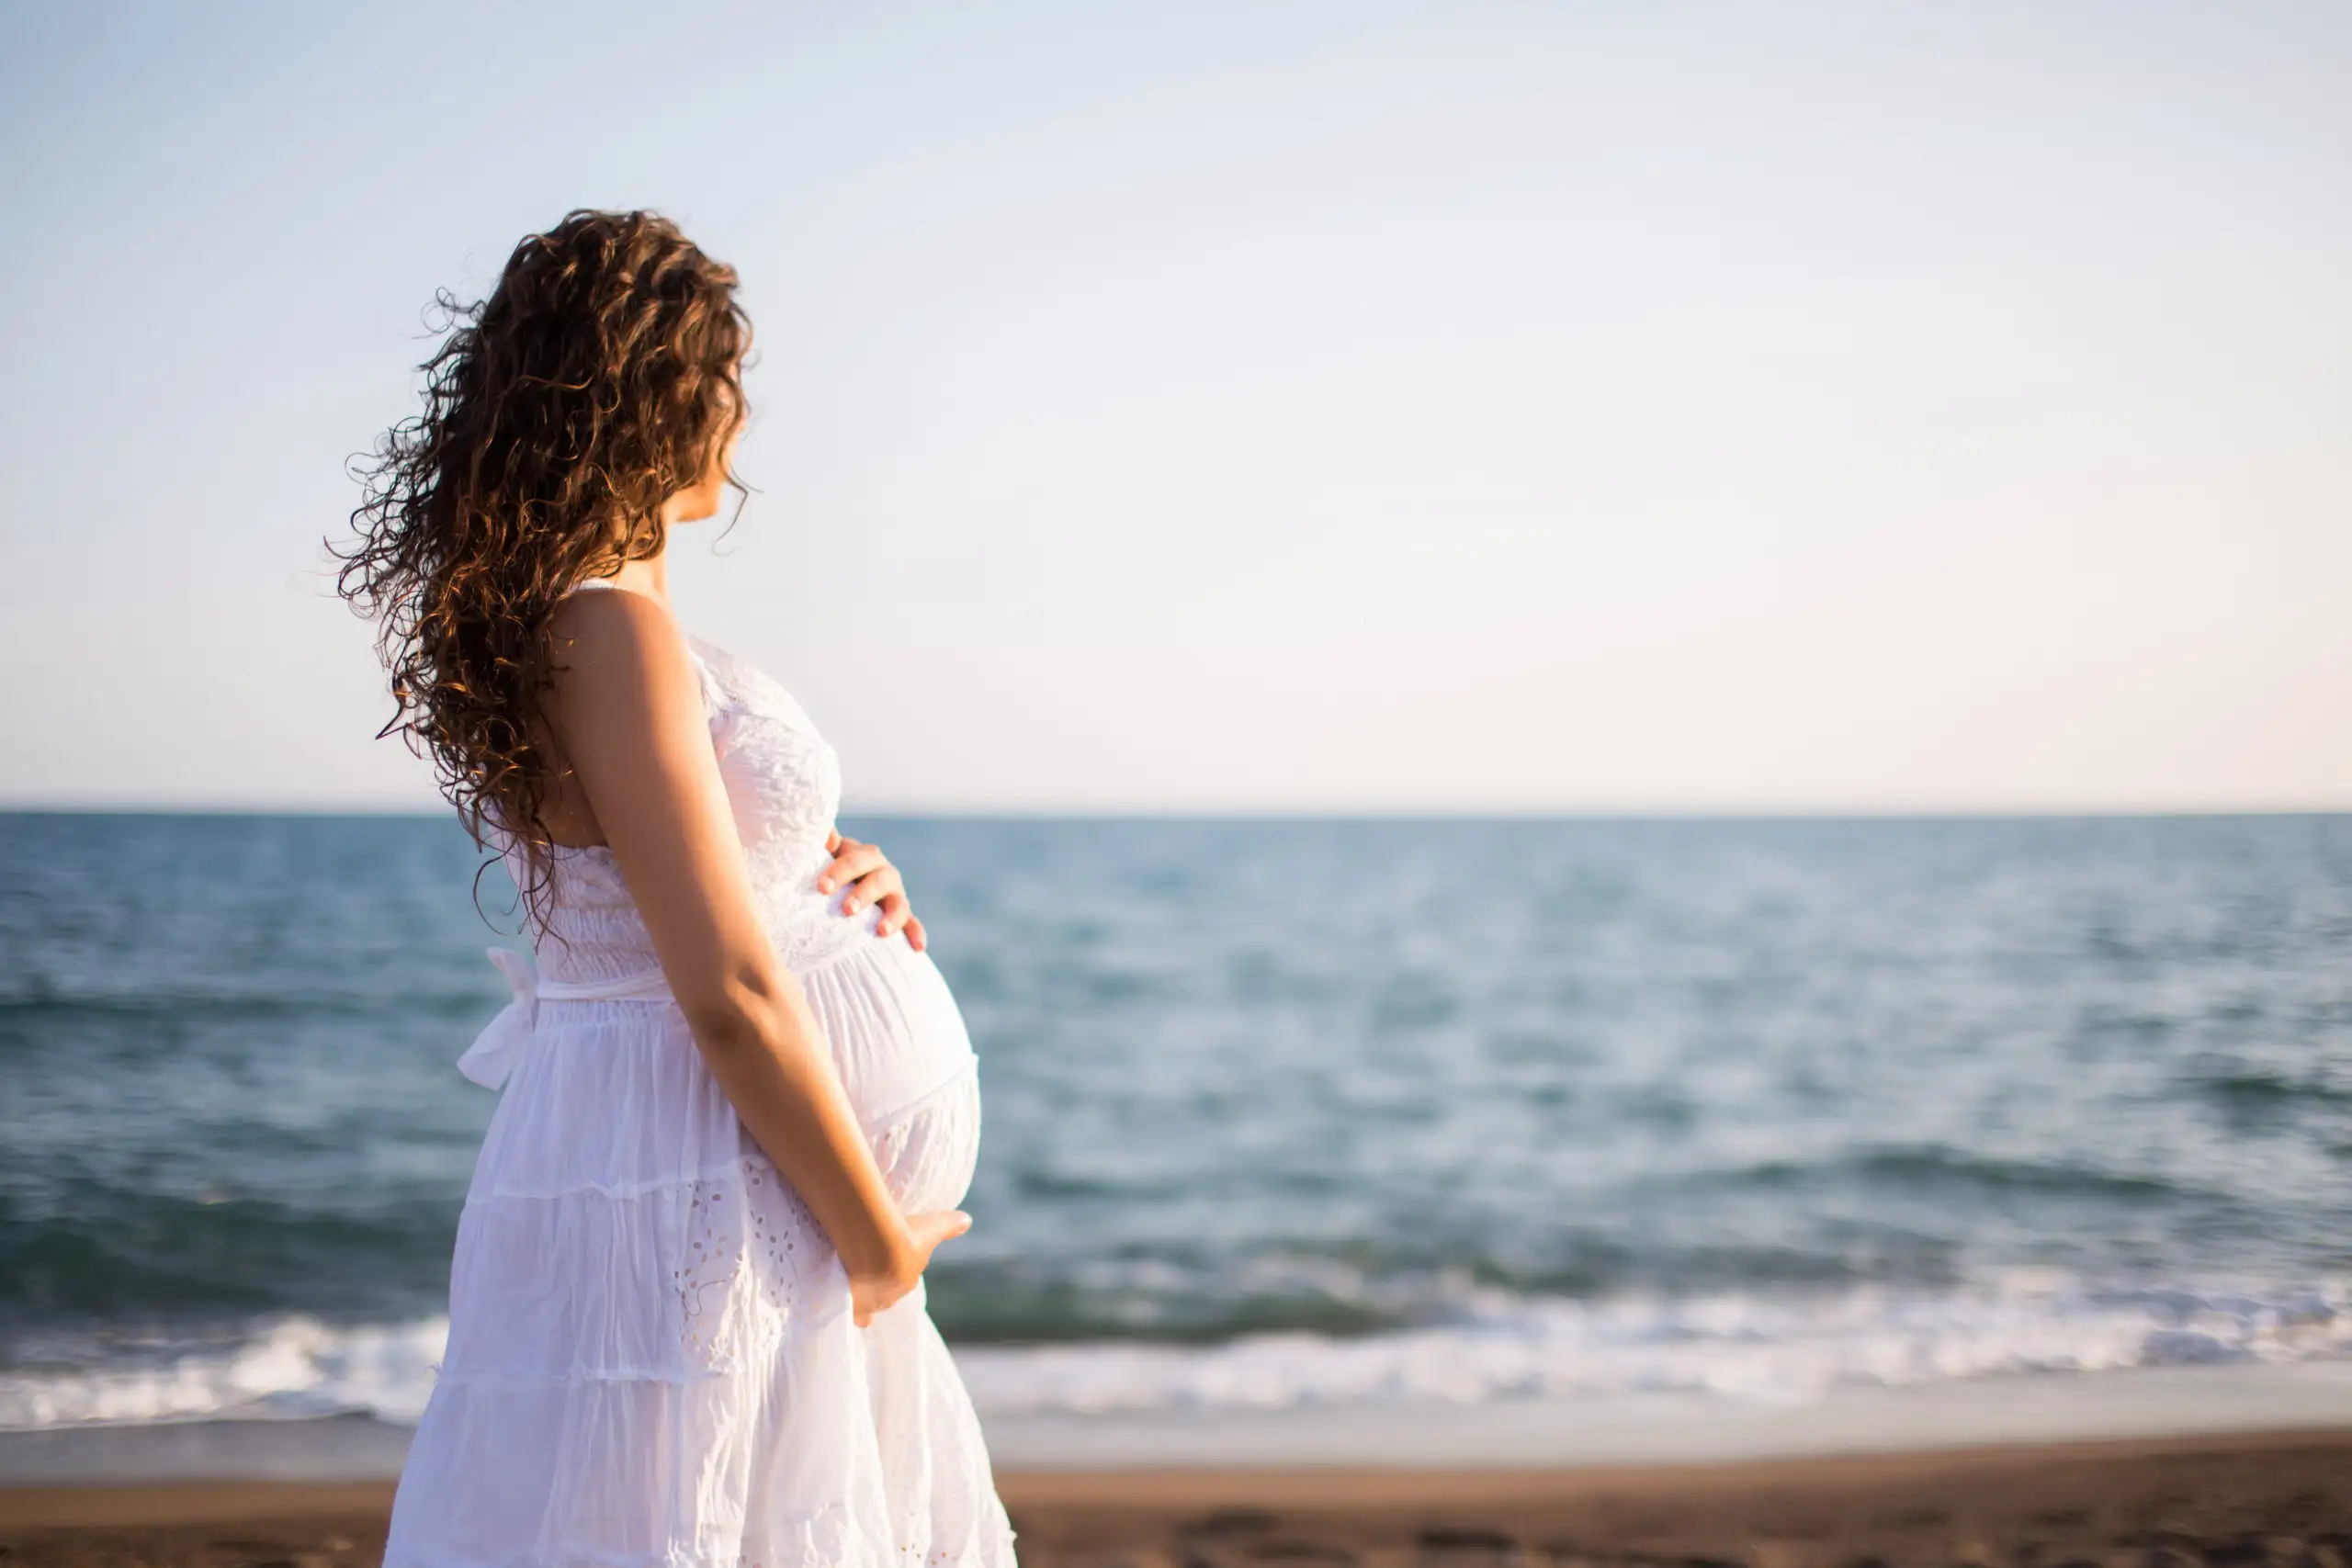 Pregnant woman in white dress standing on the beach